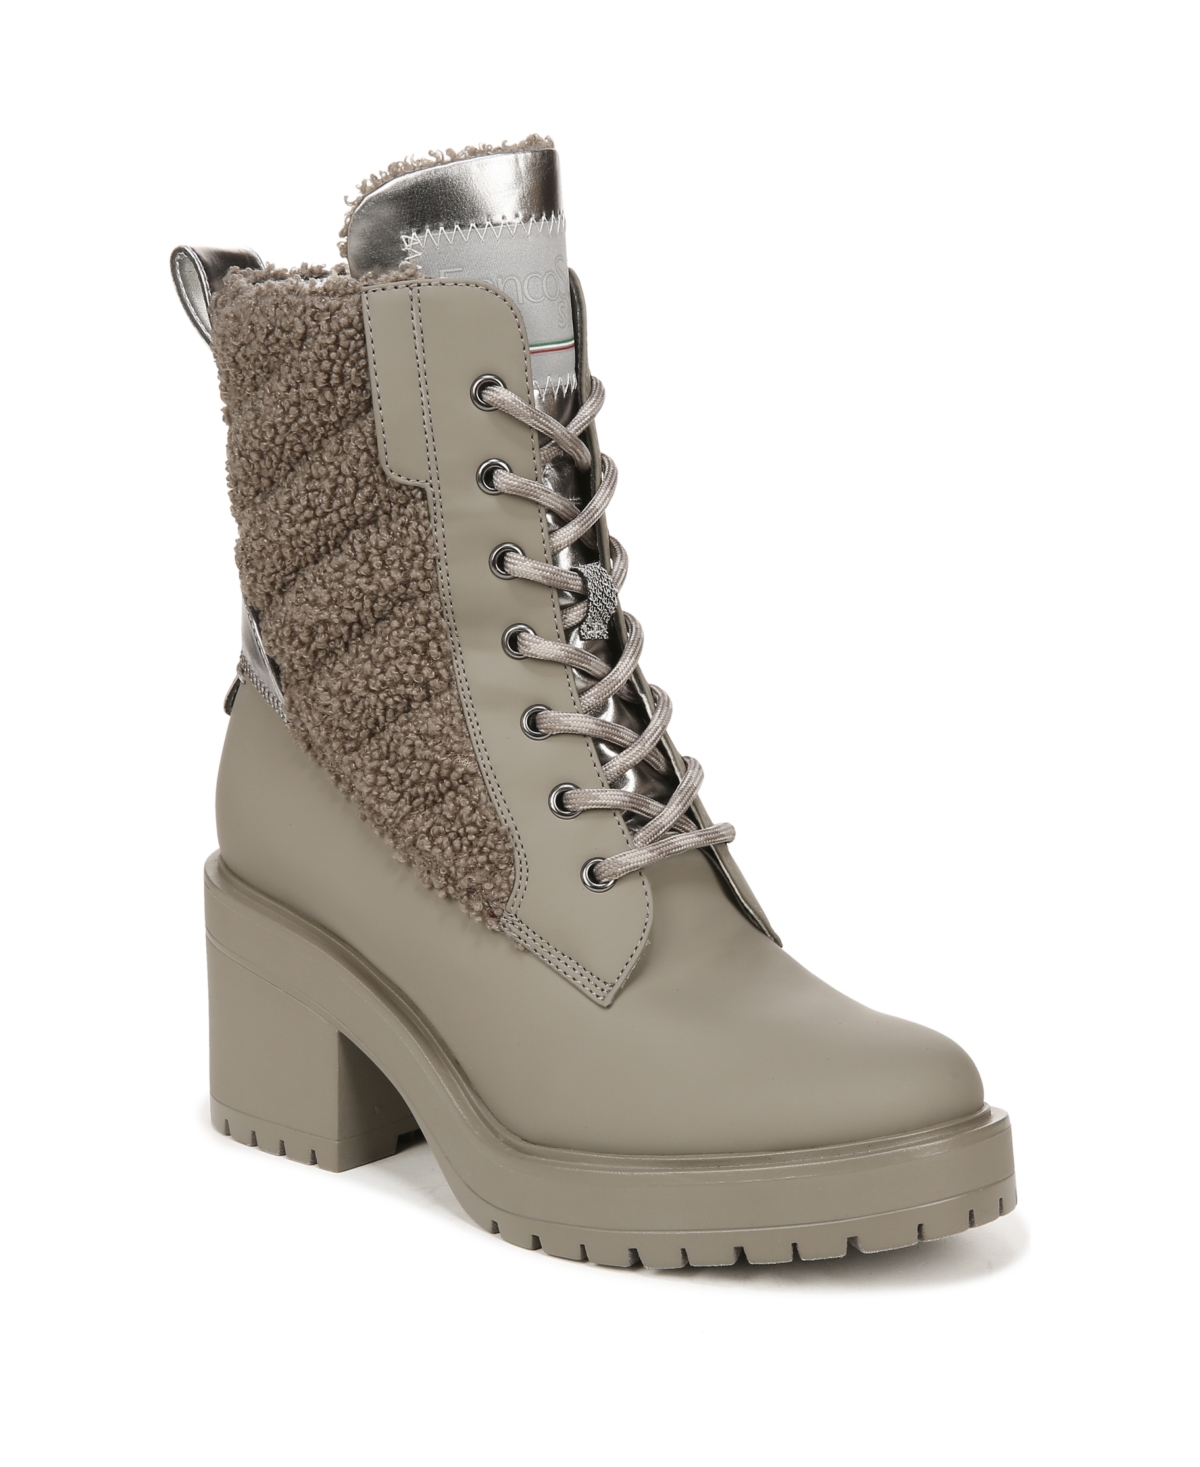 Dizzy 2 Water-Repellent Booties - Grey Faux Leather/Leather/Faux Shearling